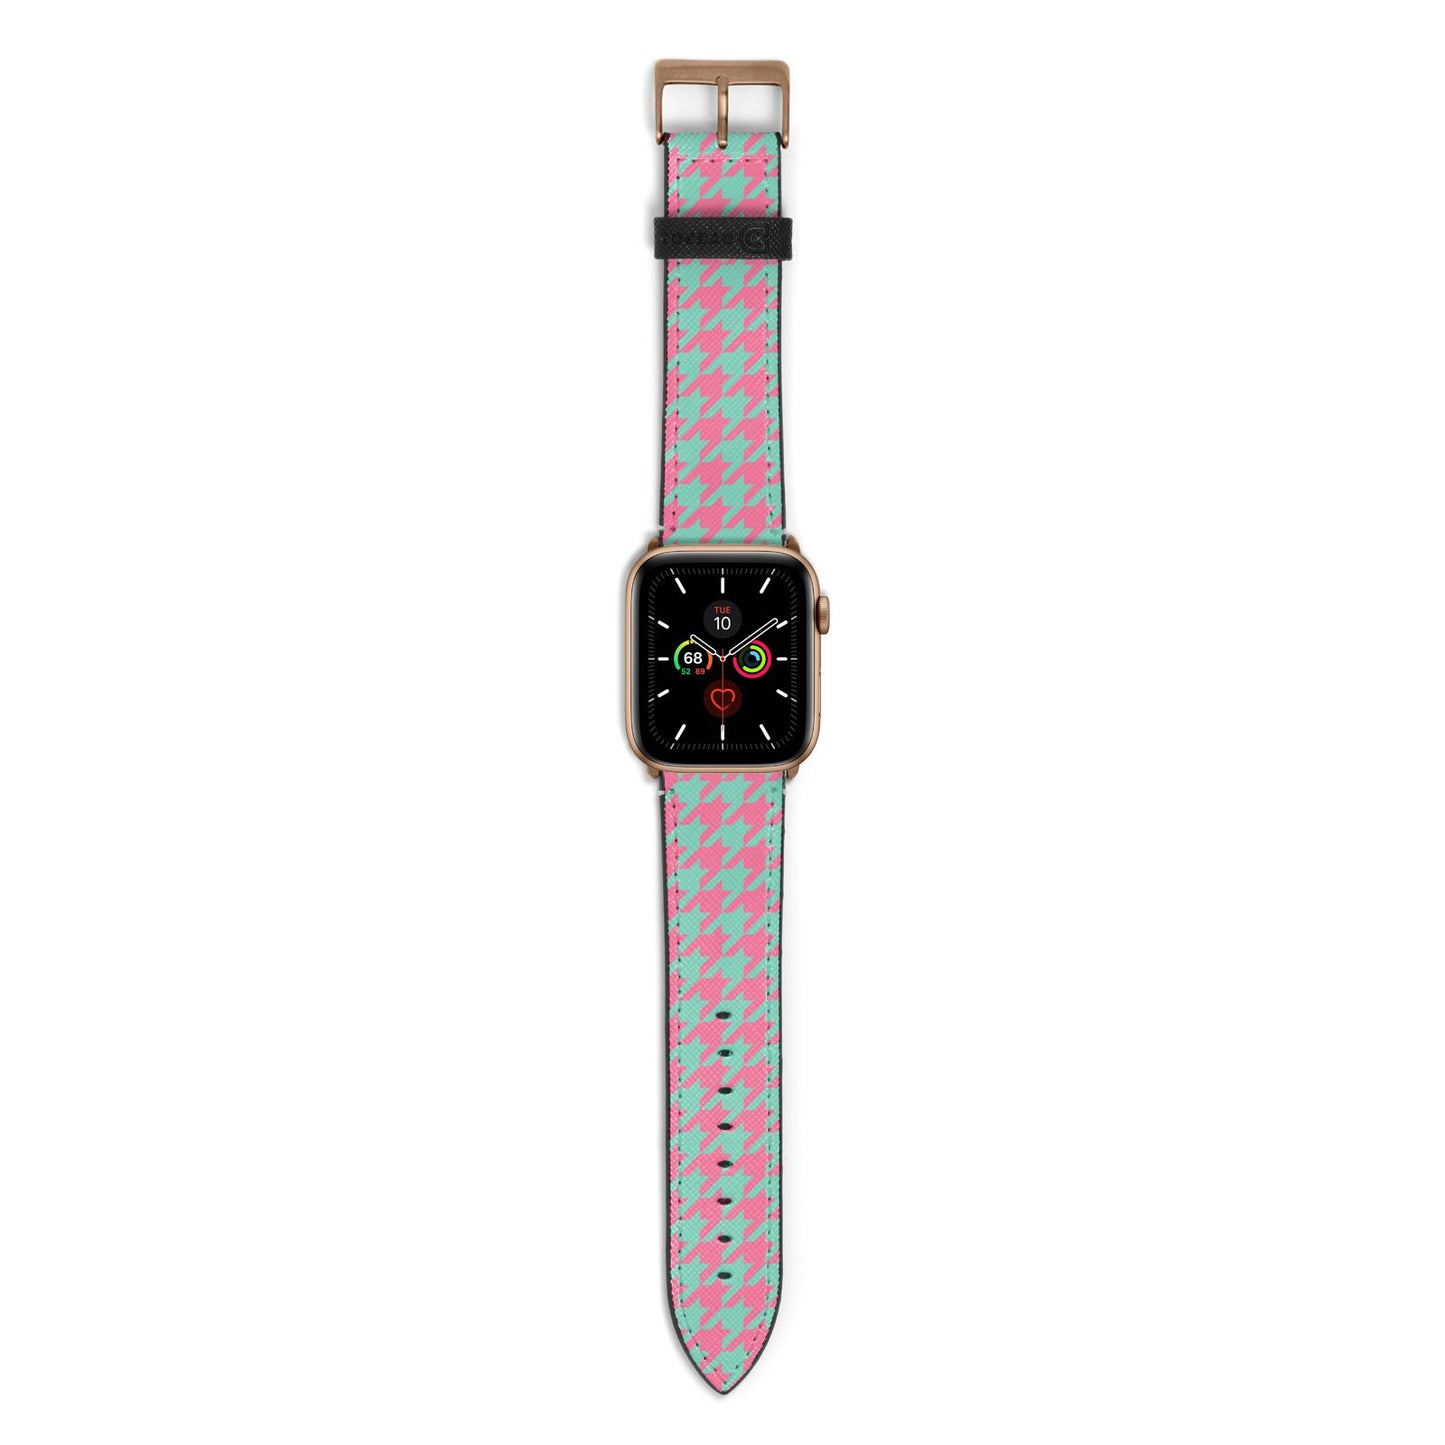 Pink Houndstooth Apple Watch Strap with Gold Hardware